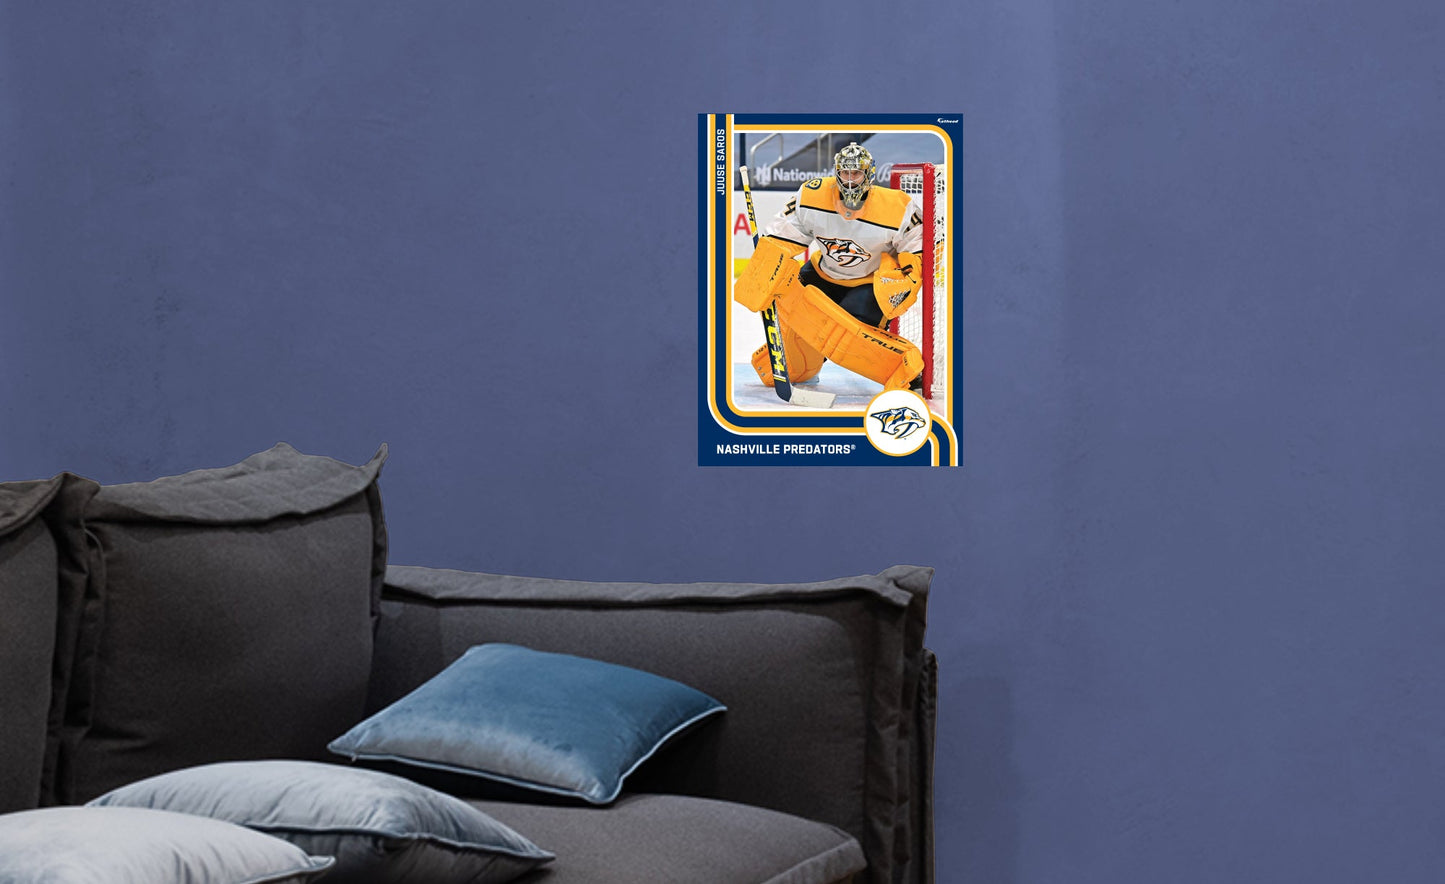 Nashville Predators: Juuse Saros Poster - Officially Licensed NHL Removable Adhesive Decal